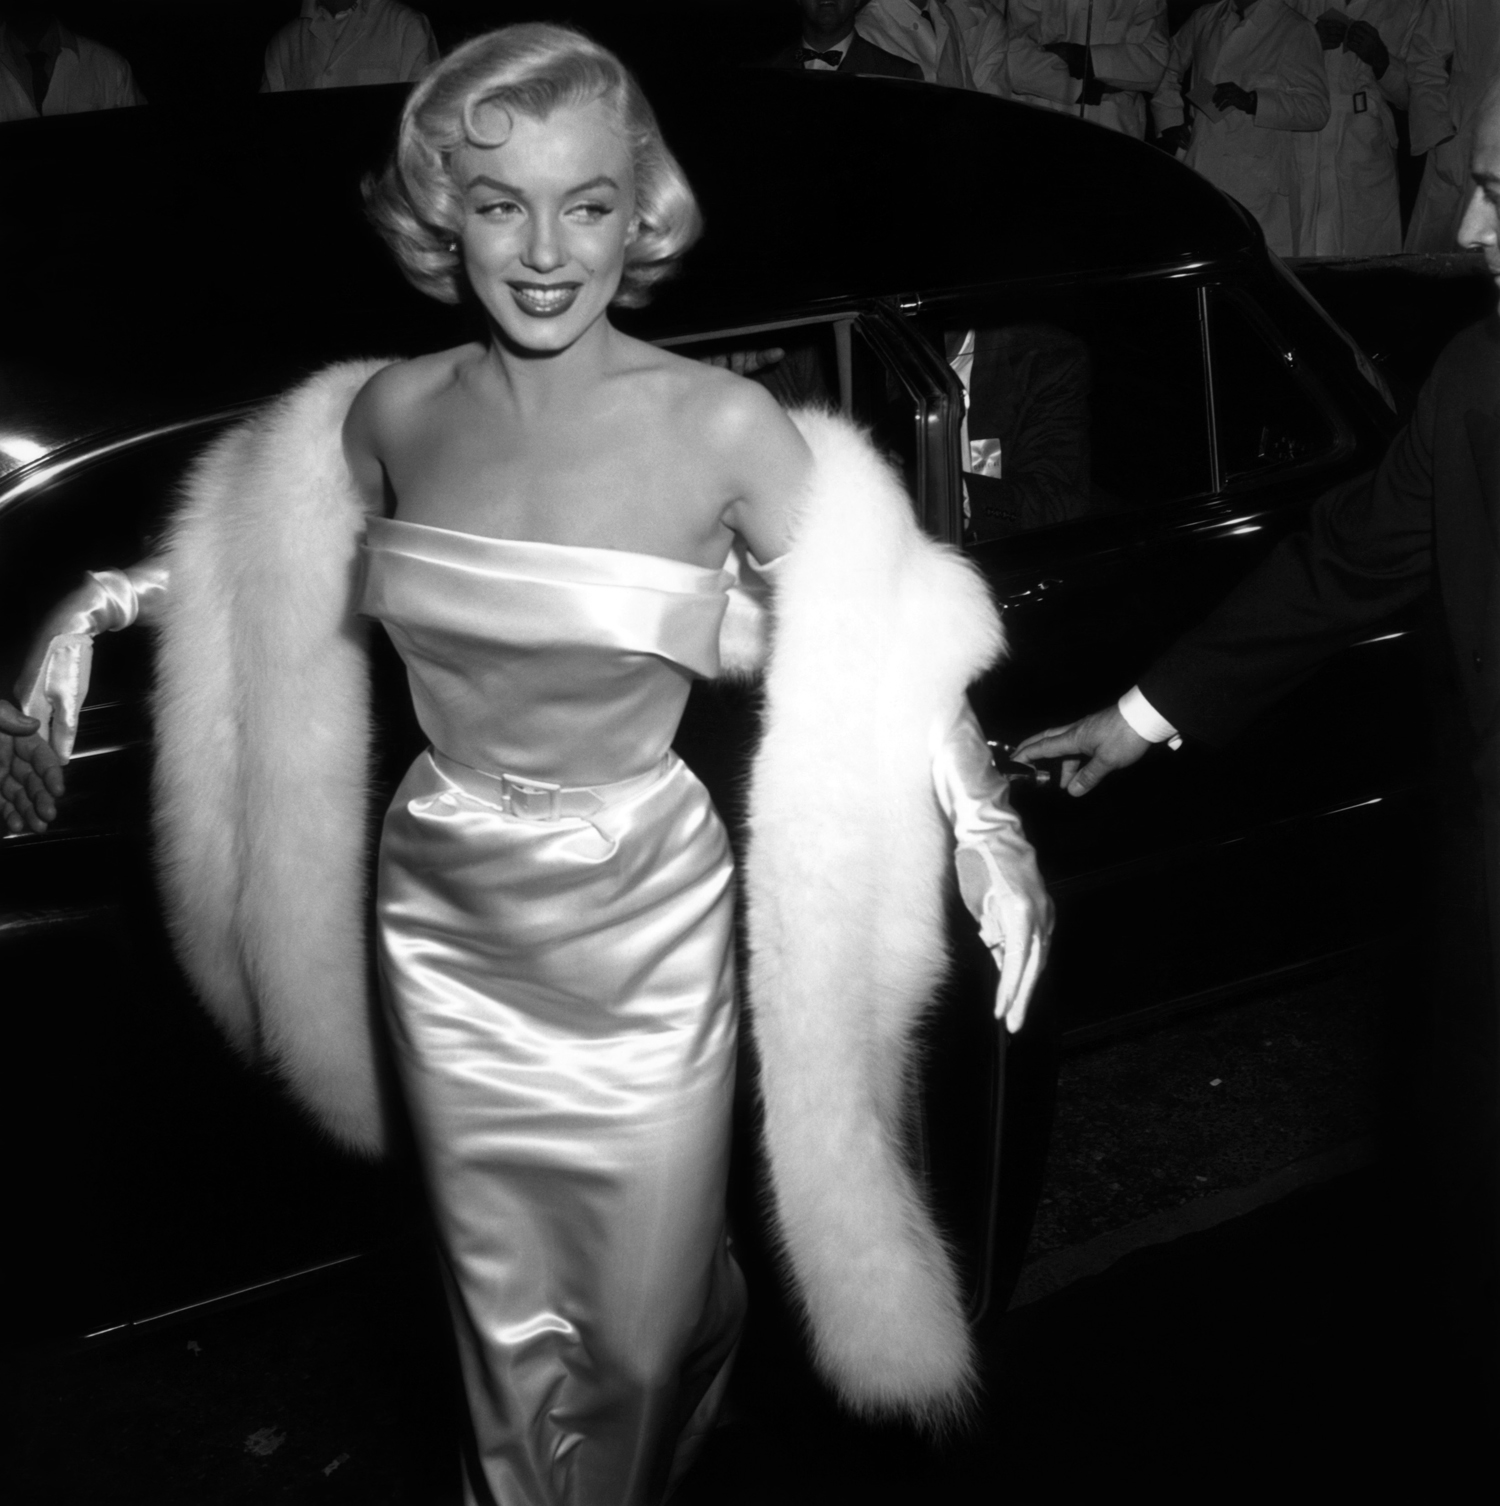 Monroe arrives at the premiere of There's No Business like Show Business in 1954.